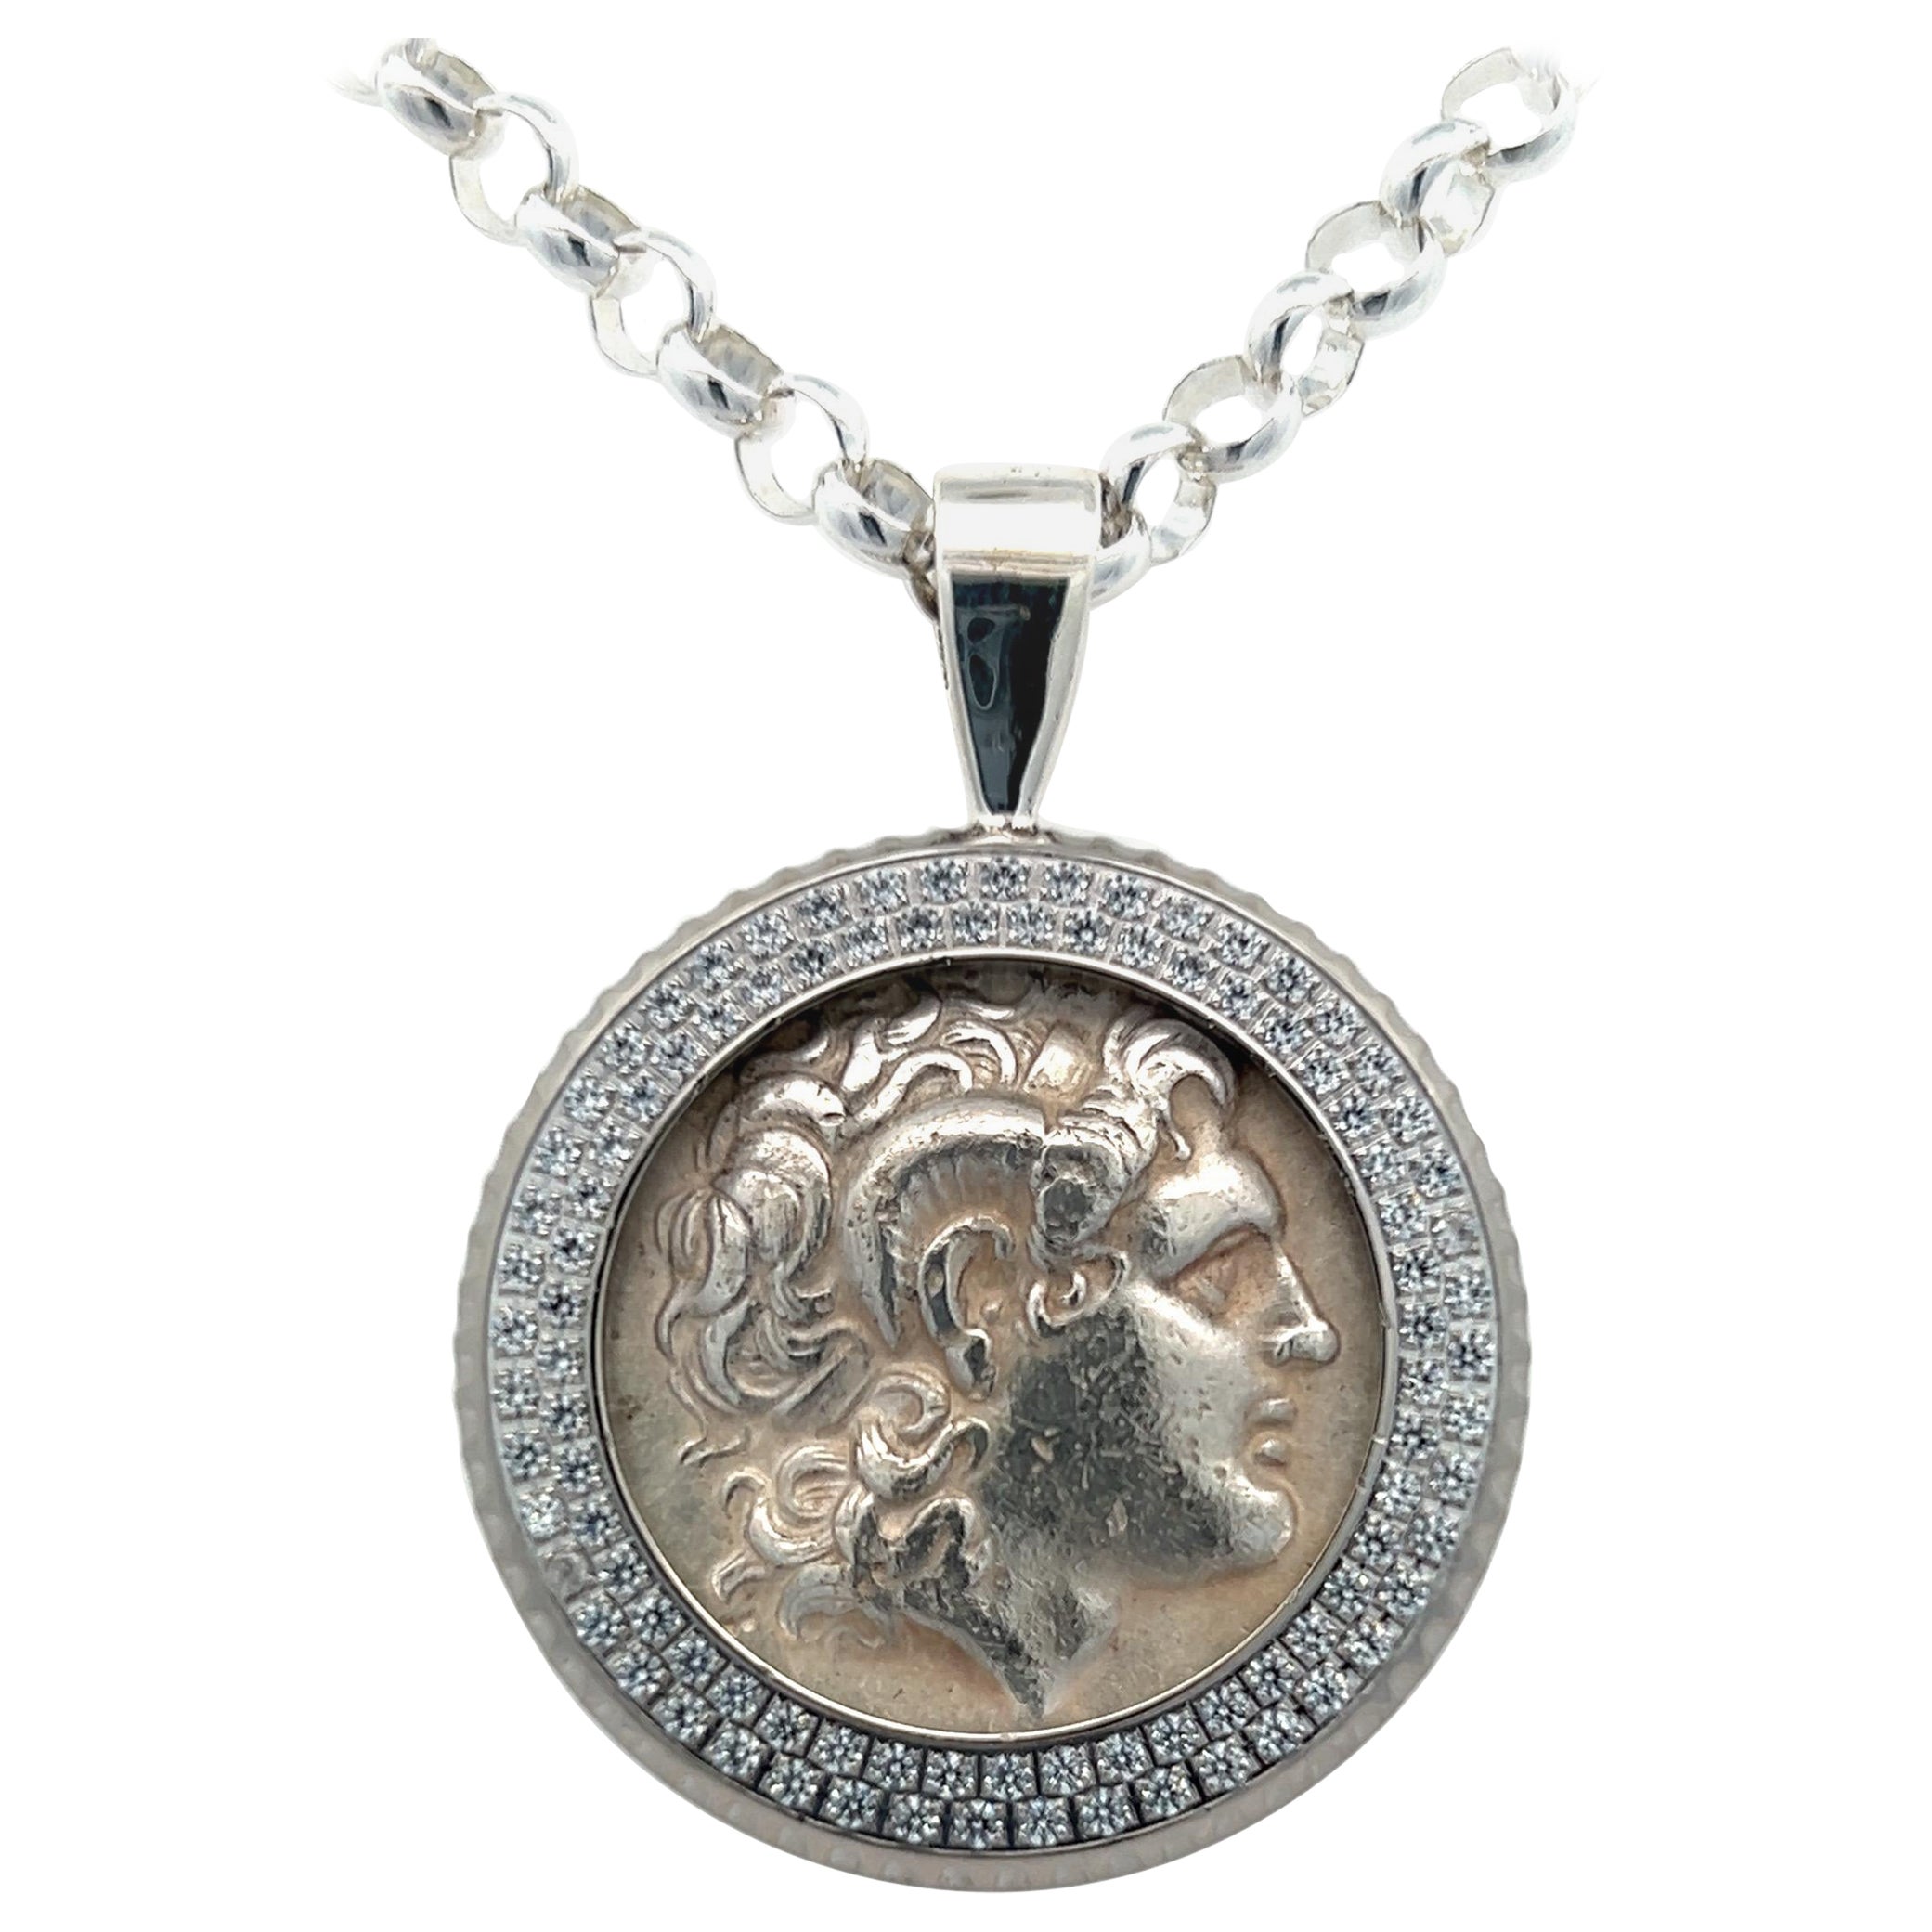 ALexander The Great Coin Chain Pendant Genuine Ancient Greek Silver Tetradrachm For Sale